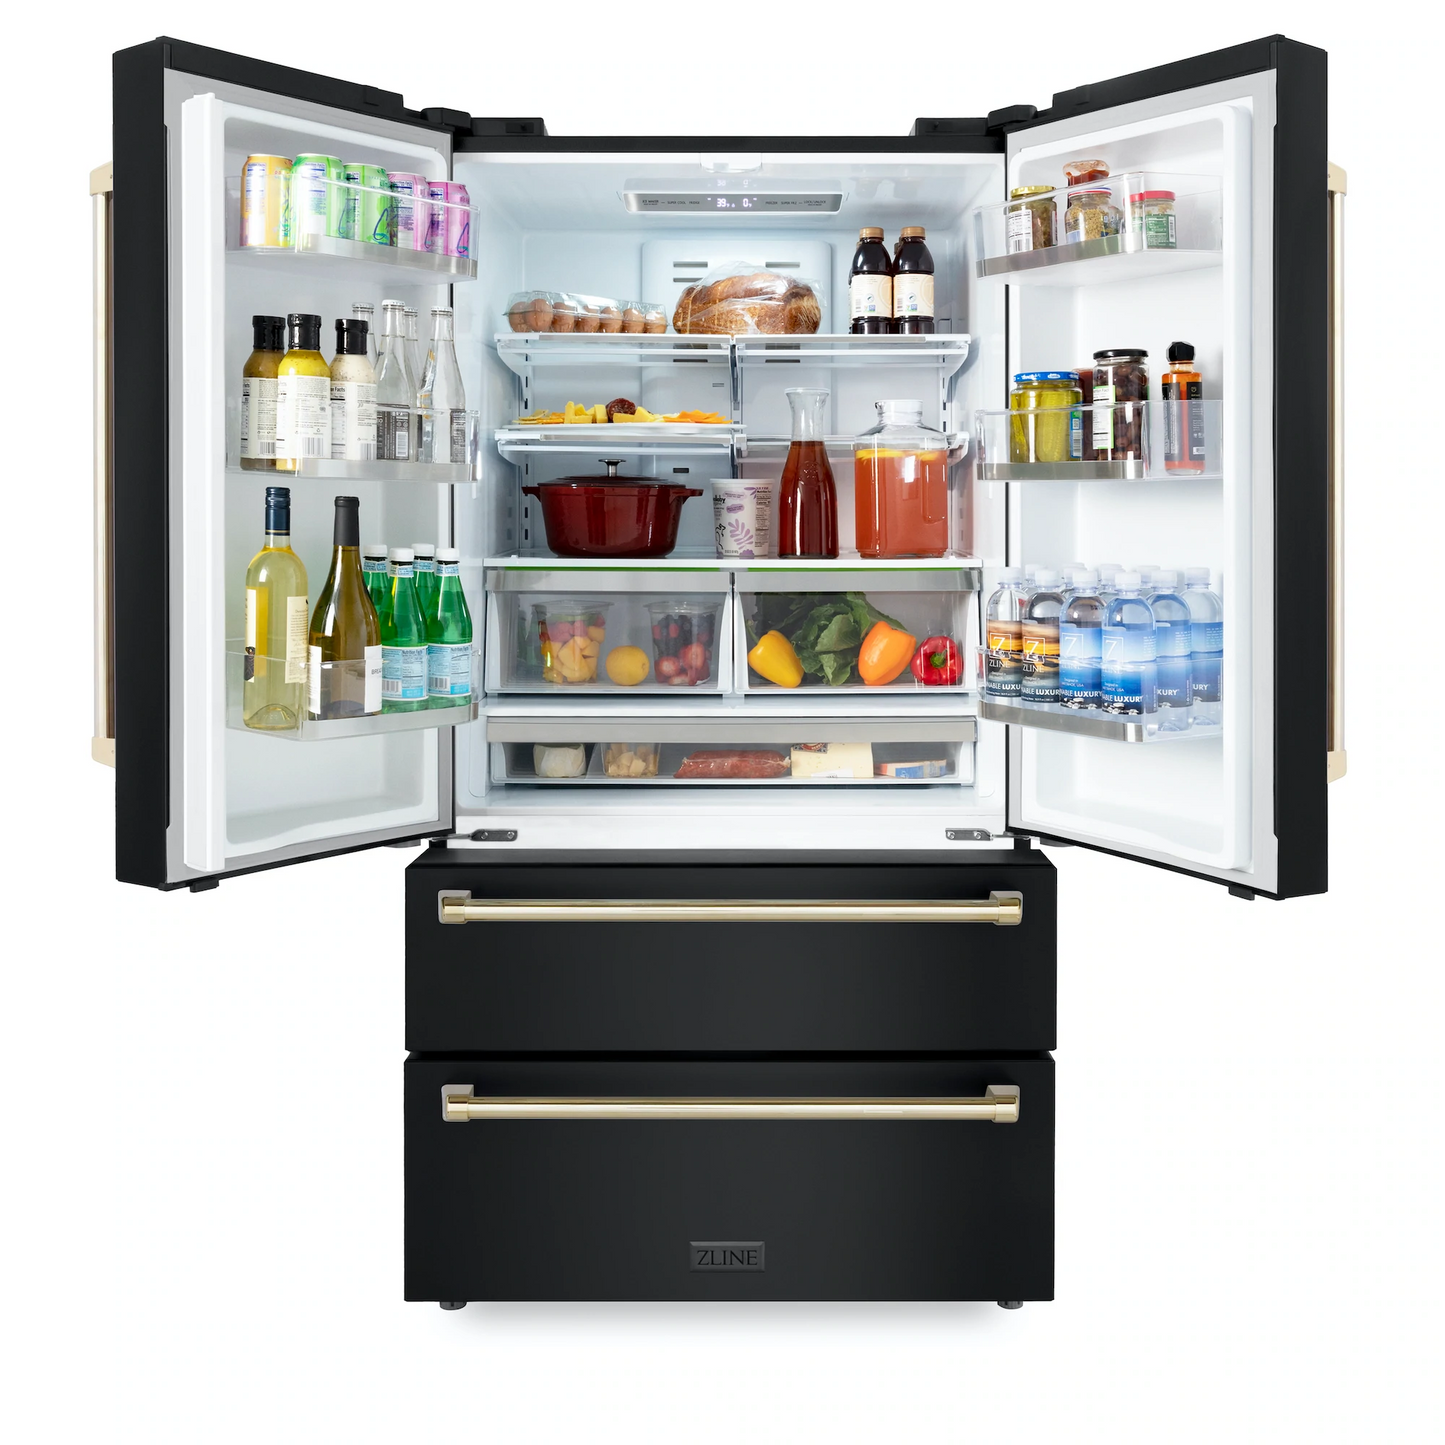 ZLINE 36 In. Autograph 22.5 cu. ft. Refrigerator with Ice Maker in Fingerprint Resistant Black Stainless Steel and Gold Accents